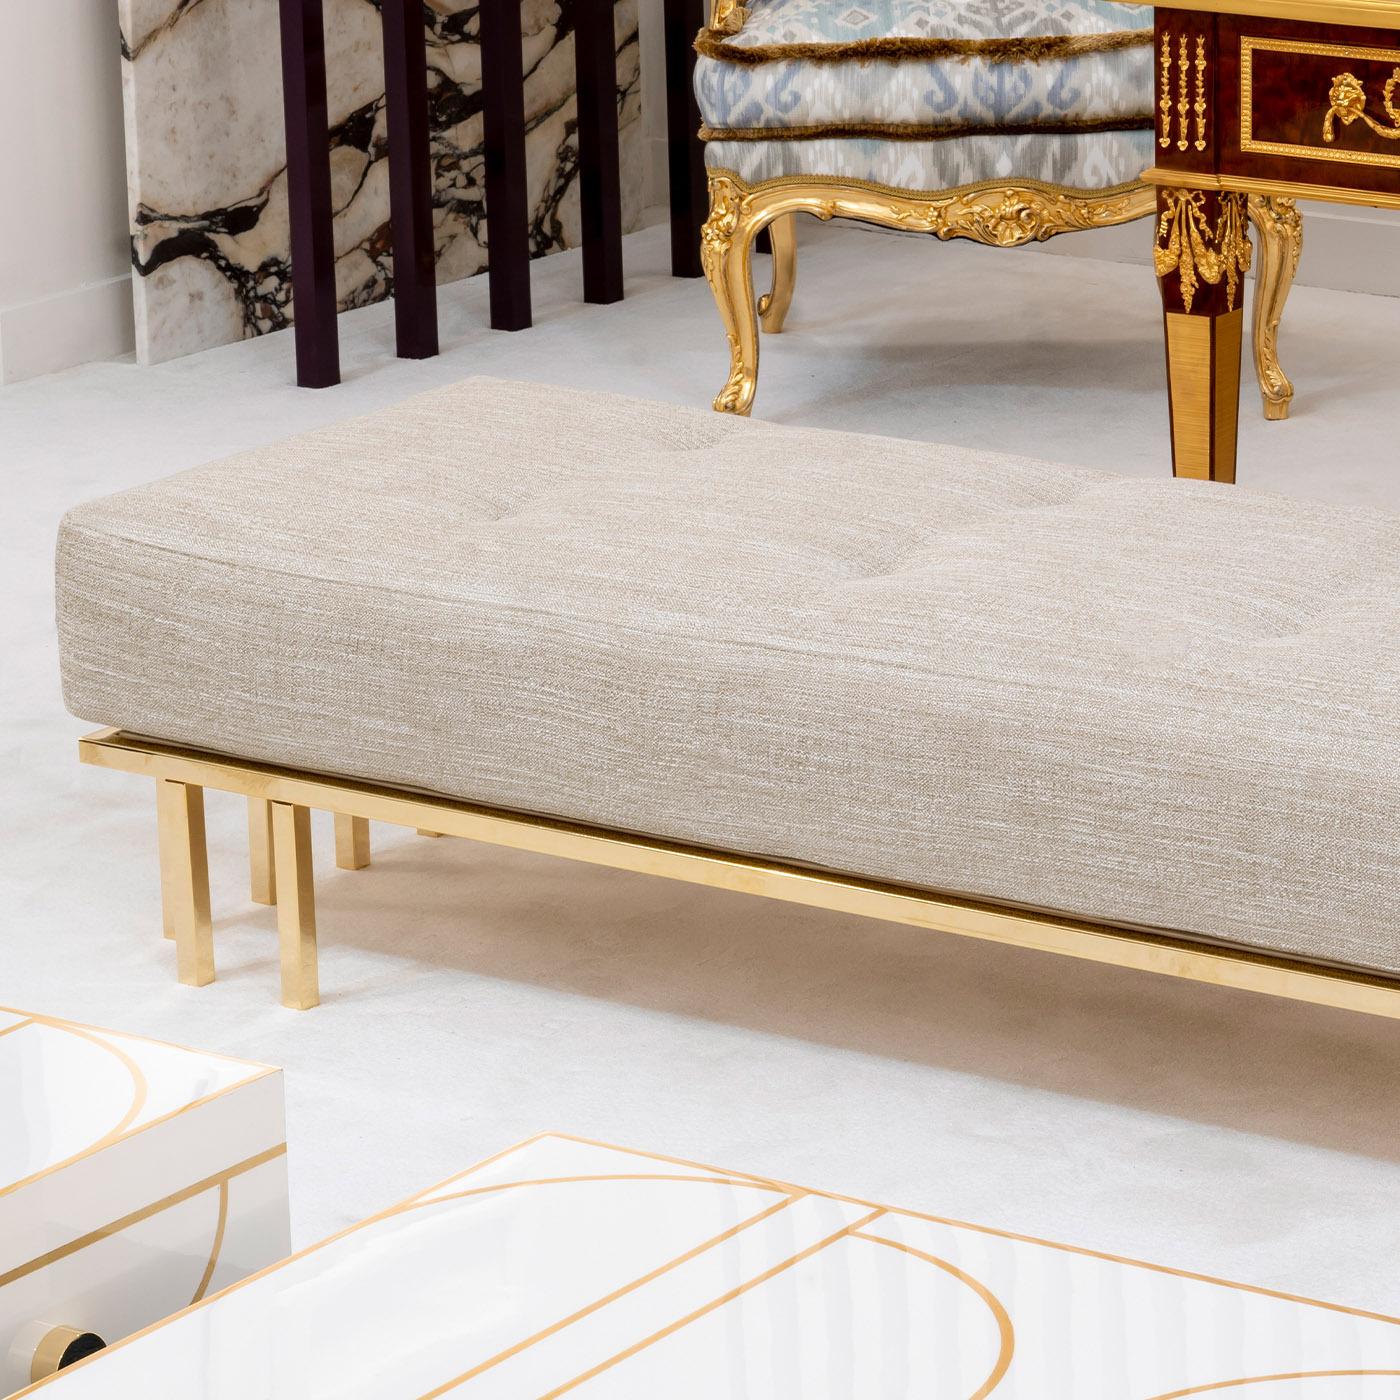 A clean and elegant design that embodies a timeless and sophisticated style, this bench will make for an exquisite addition to both private and contract interior settings. Handmade of gold-finished and chromed steel, it is upholstered with gray